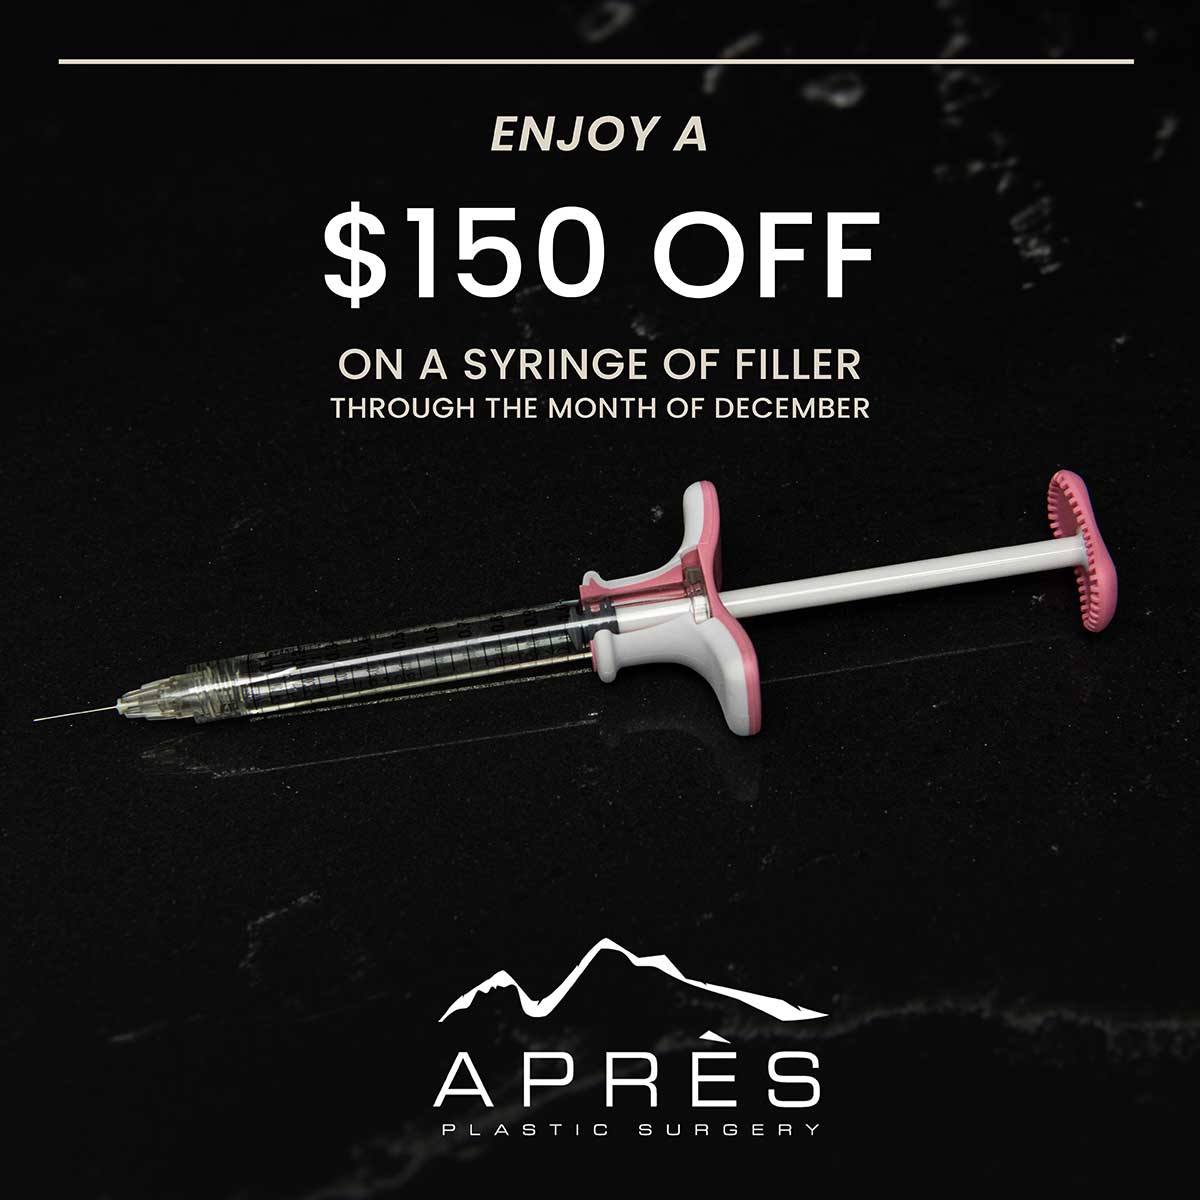 black marble background and photo of syringe with text saying: enjoy $150 off a syringe of filler through the month of december